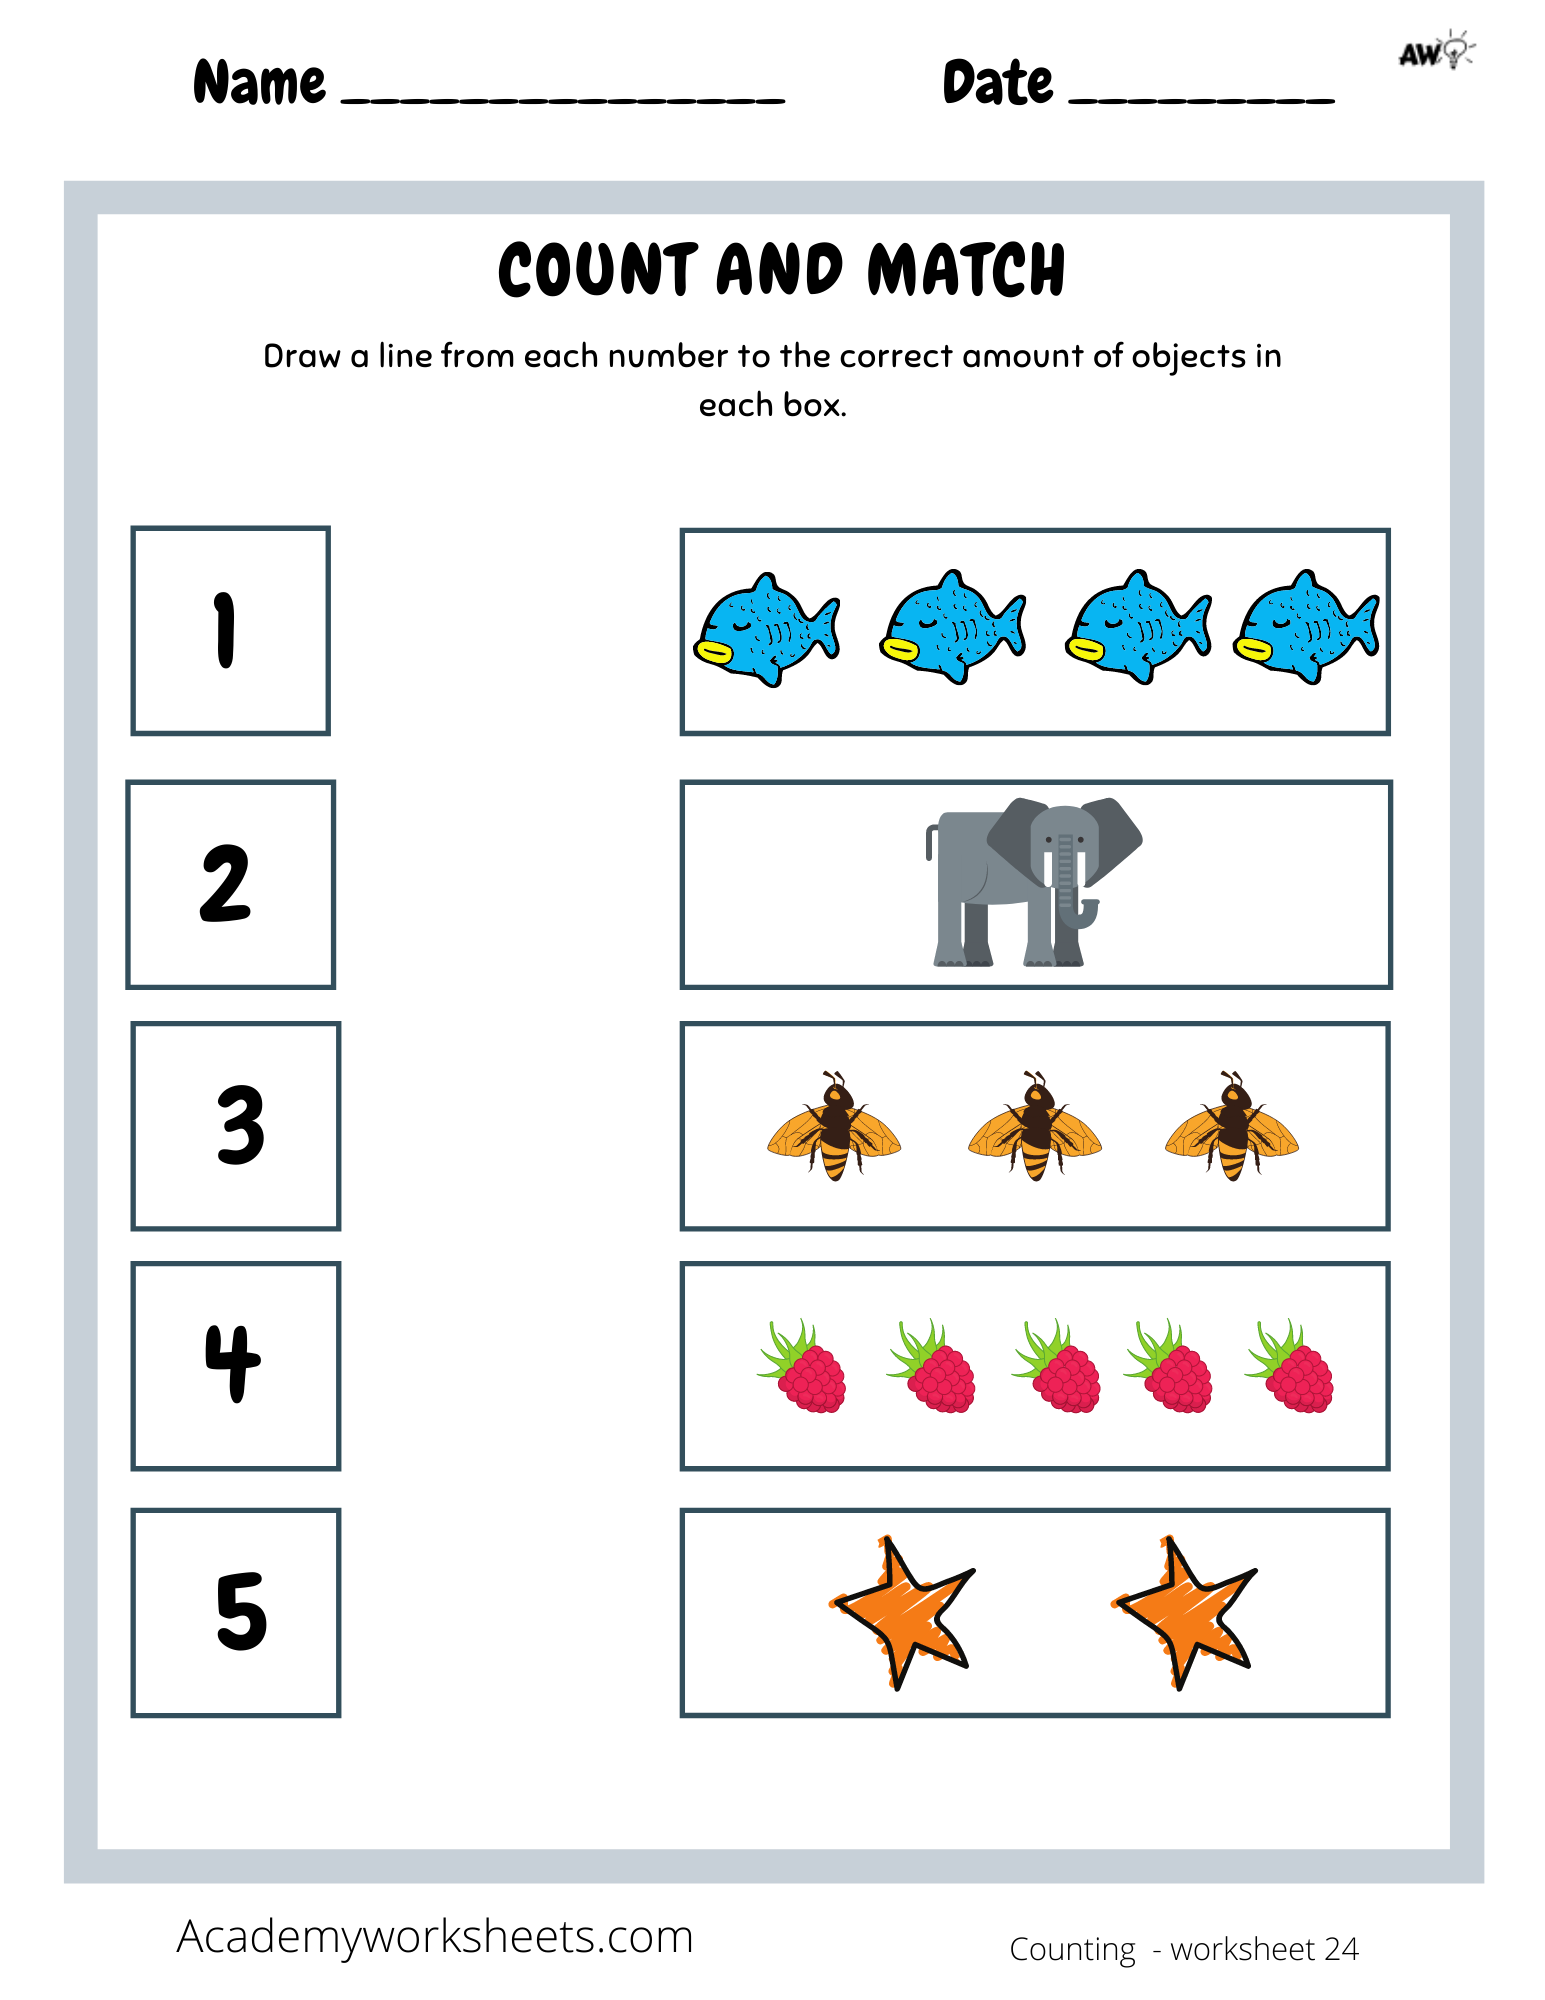 Count and Match Numbers 21-21 Worksheets - Academy Worksheets With Count By 5s Worksheet